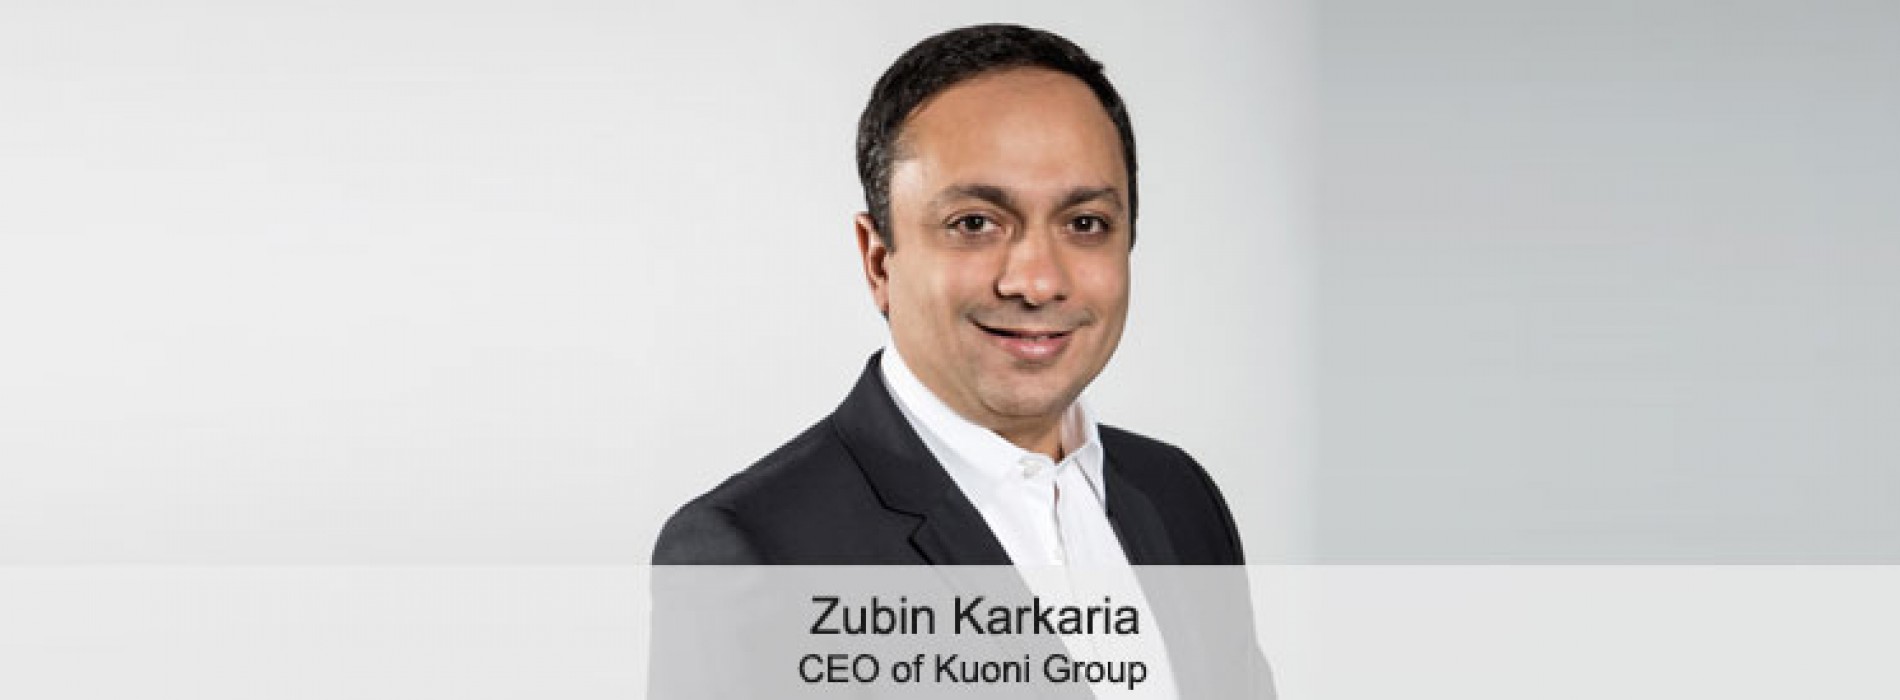 Zubin Karkaria appointed as CEO of Kuoni Group